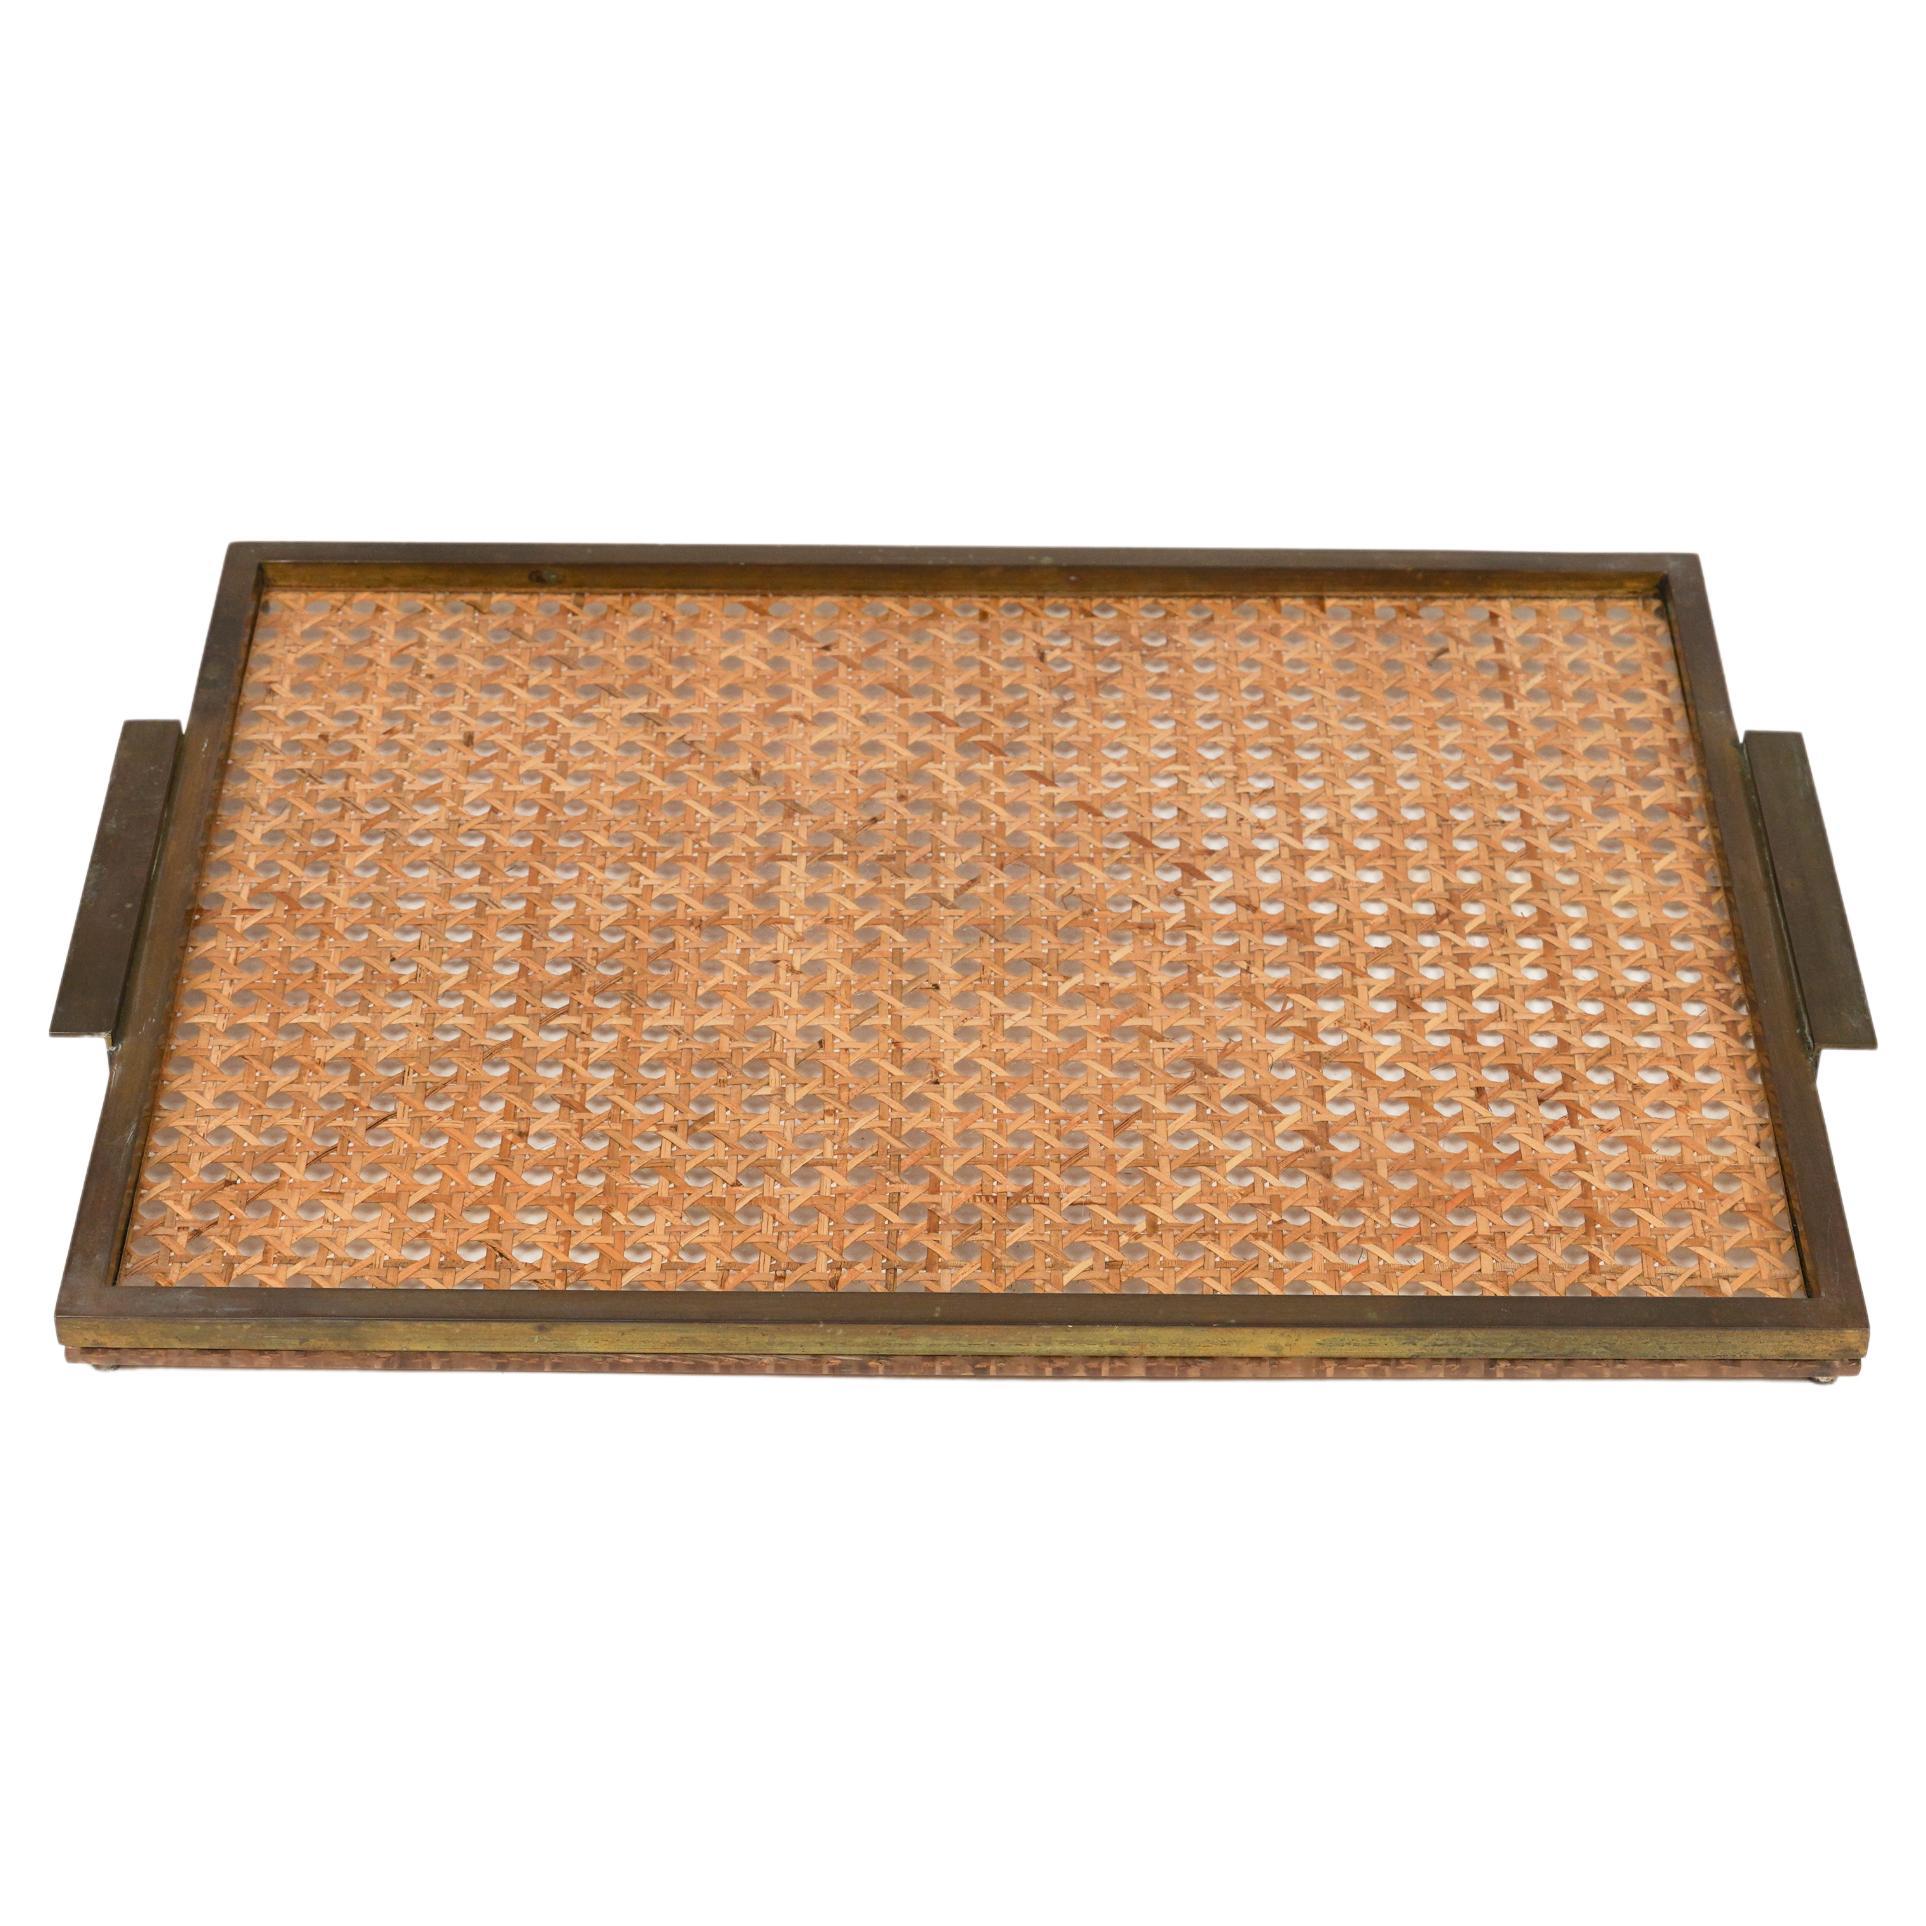 Serving Tray in Lucite, Rattan & Brass Christian Dior Style, Italy, 1970s For Sale